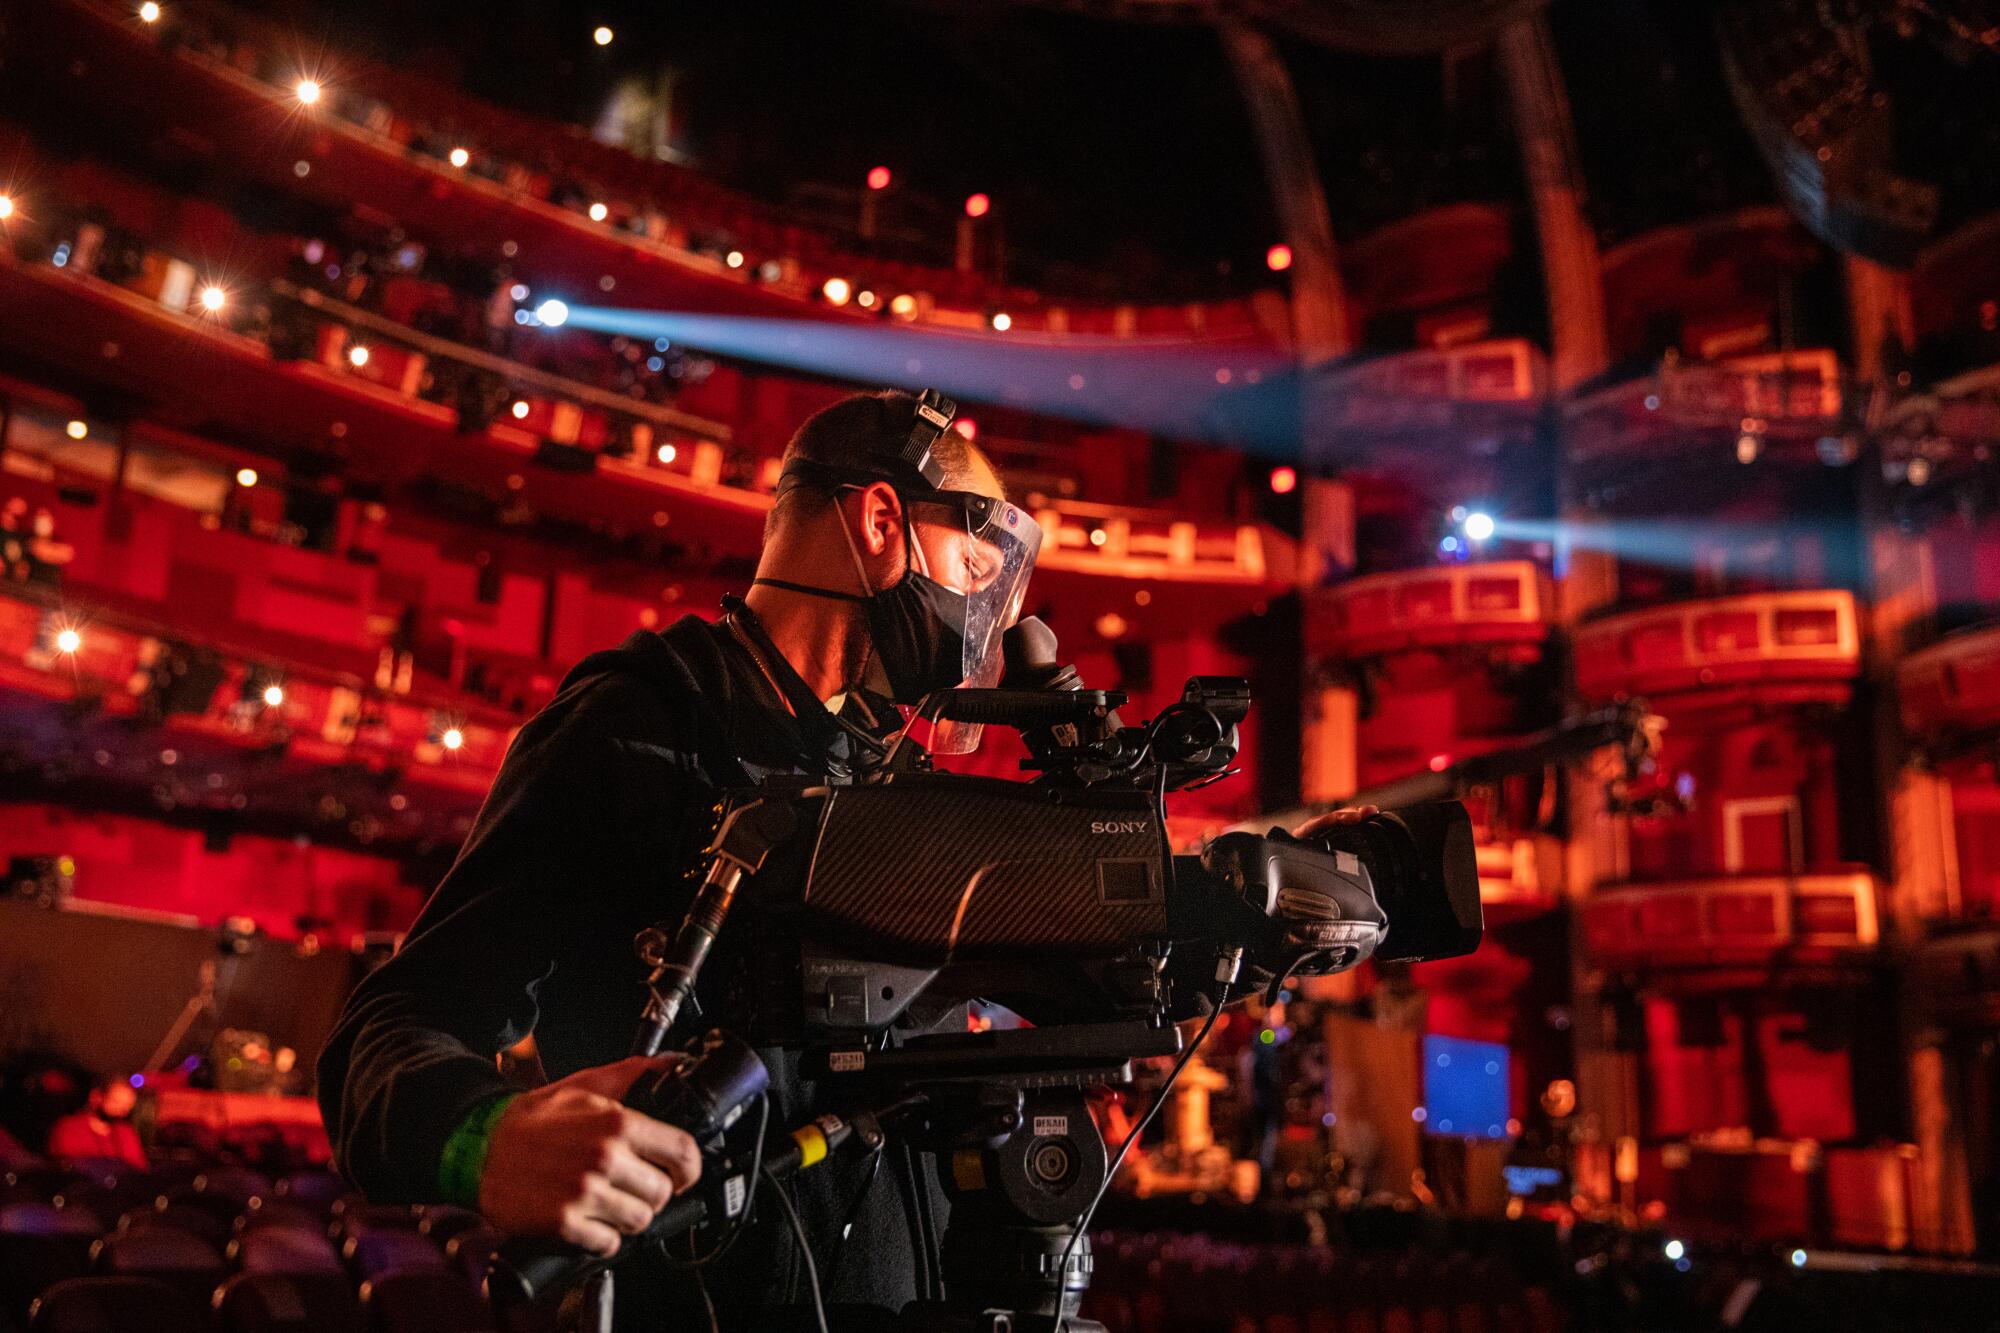 Camera operator Dylan Sanford in full PPE inside Dolby Theatre during rehearsals.